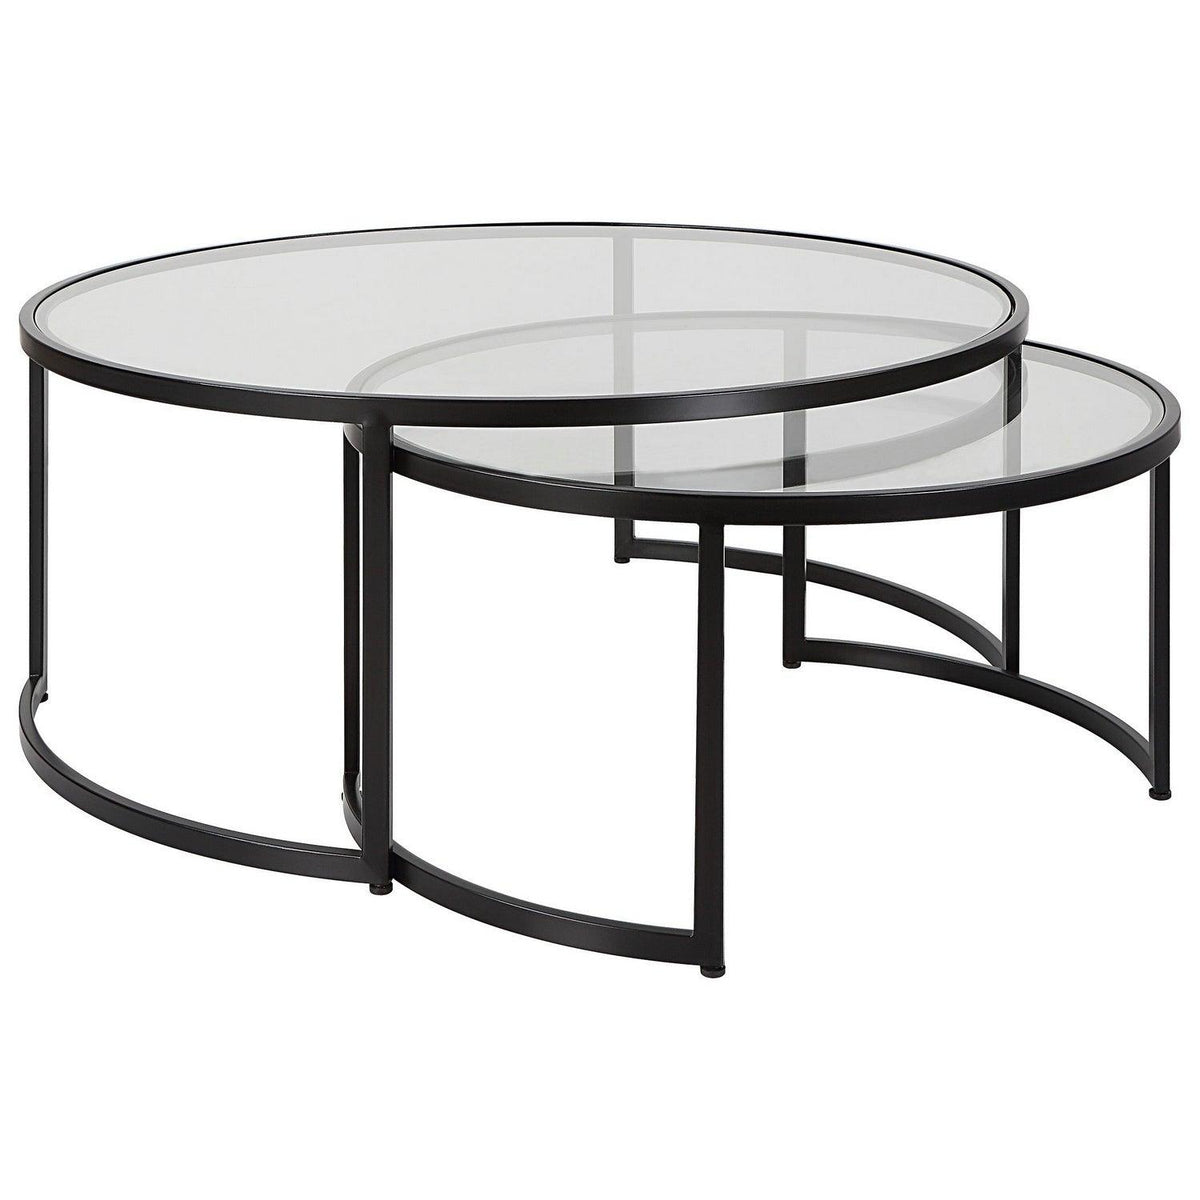 The Uttermost - Rhea Nesting Coffee Tables S/2 - 25190 | Montreal Lighting & Hardware